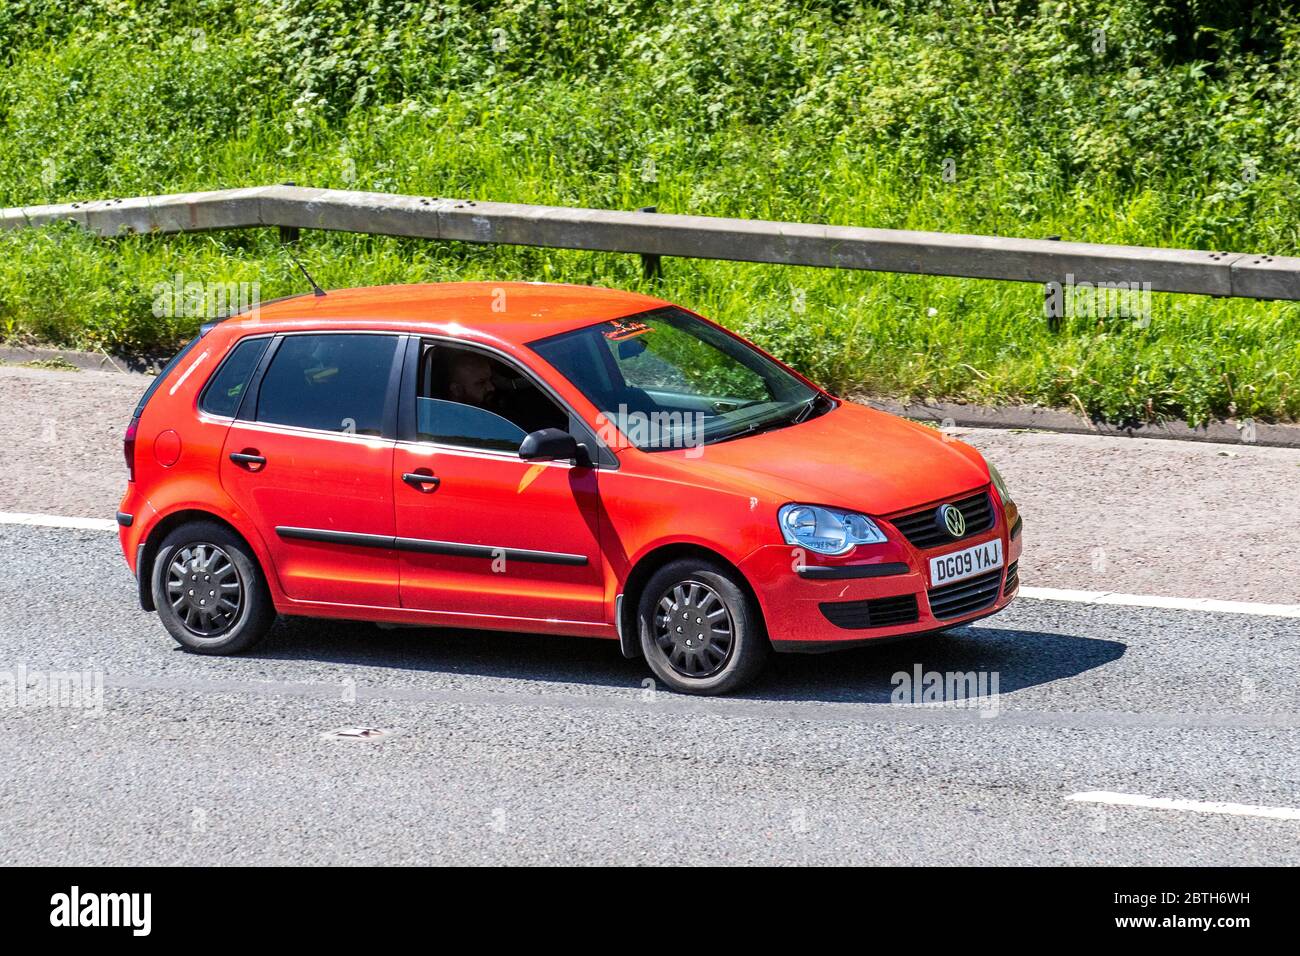 Volkswagen 2009 High Resolution Stock Photography Images - Alamy